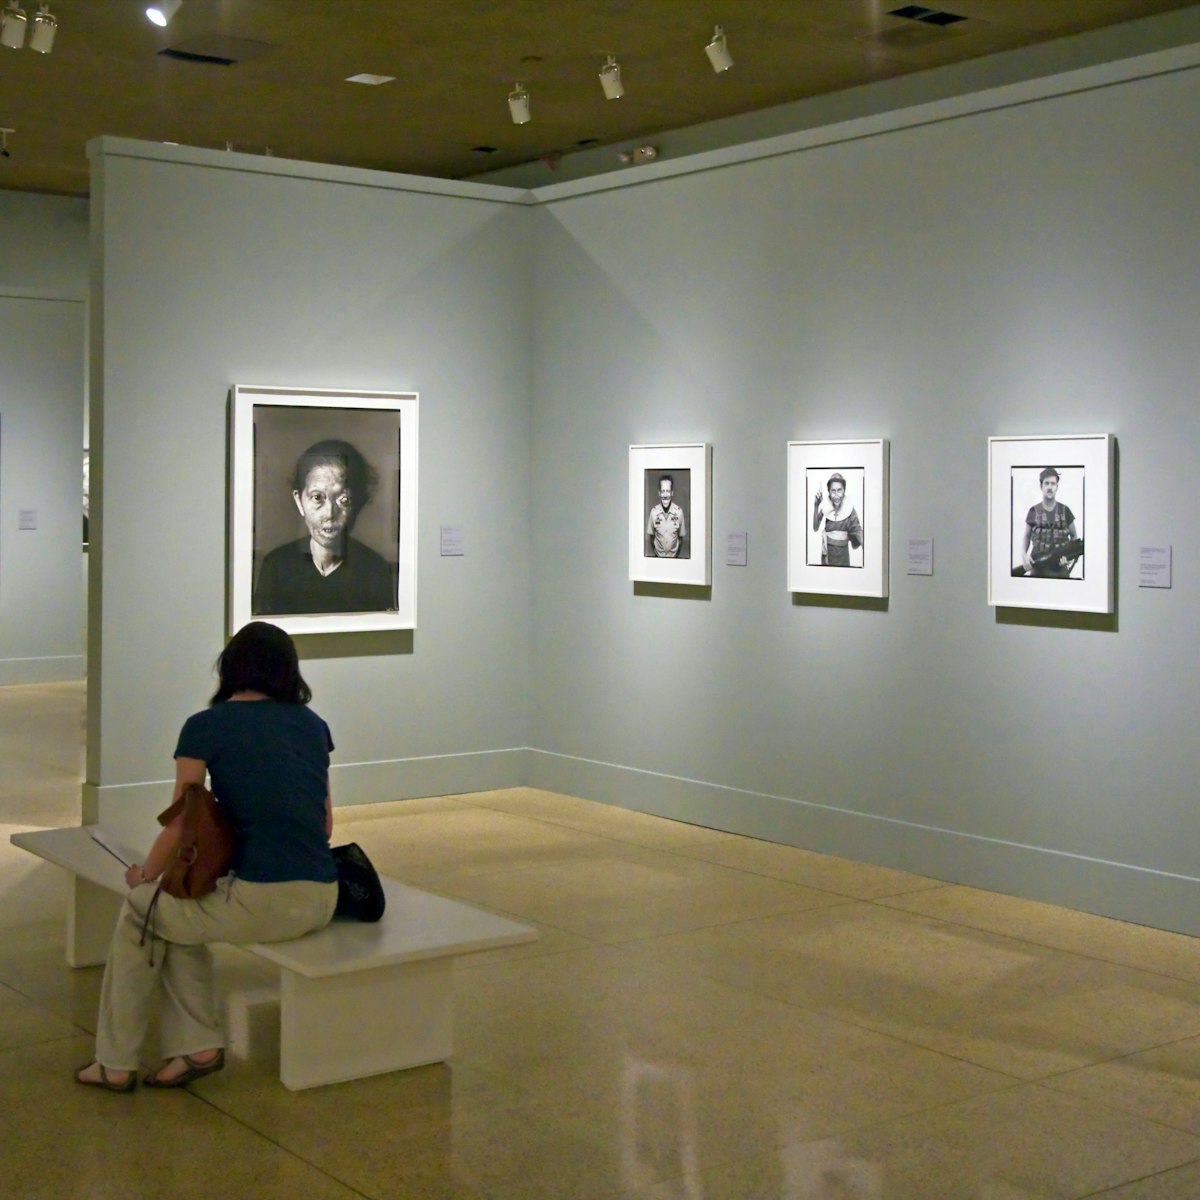 E3MYC0 RICHARD AVEDON photographs on display in the SAN DIEGO MUSEUM OF ART is located in BALBOA PARK - SAN DIEGO, CALIFORNIA
Museum of Photographic Arts
MoPA
